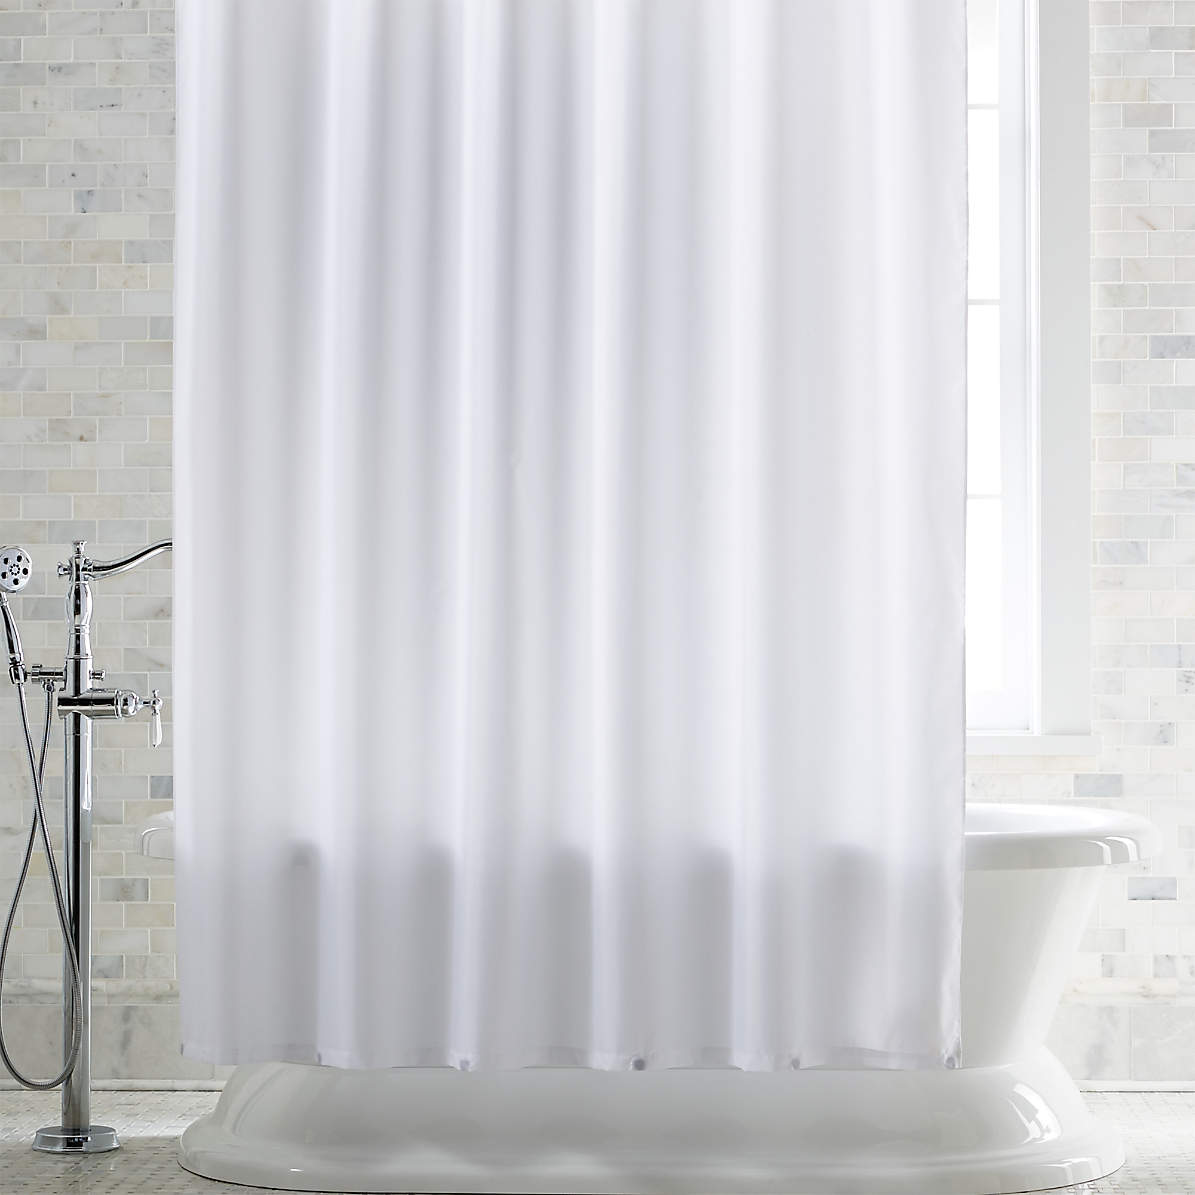 White Shower Curtain Liner With Magnets, Best Fabric For Shower Curtain Liner